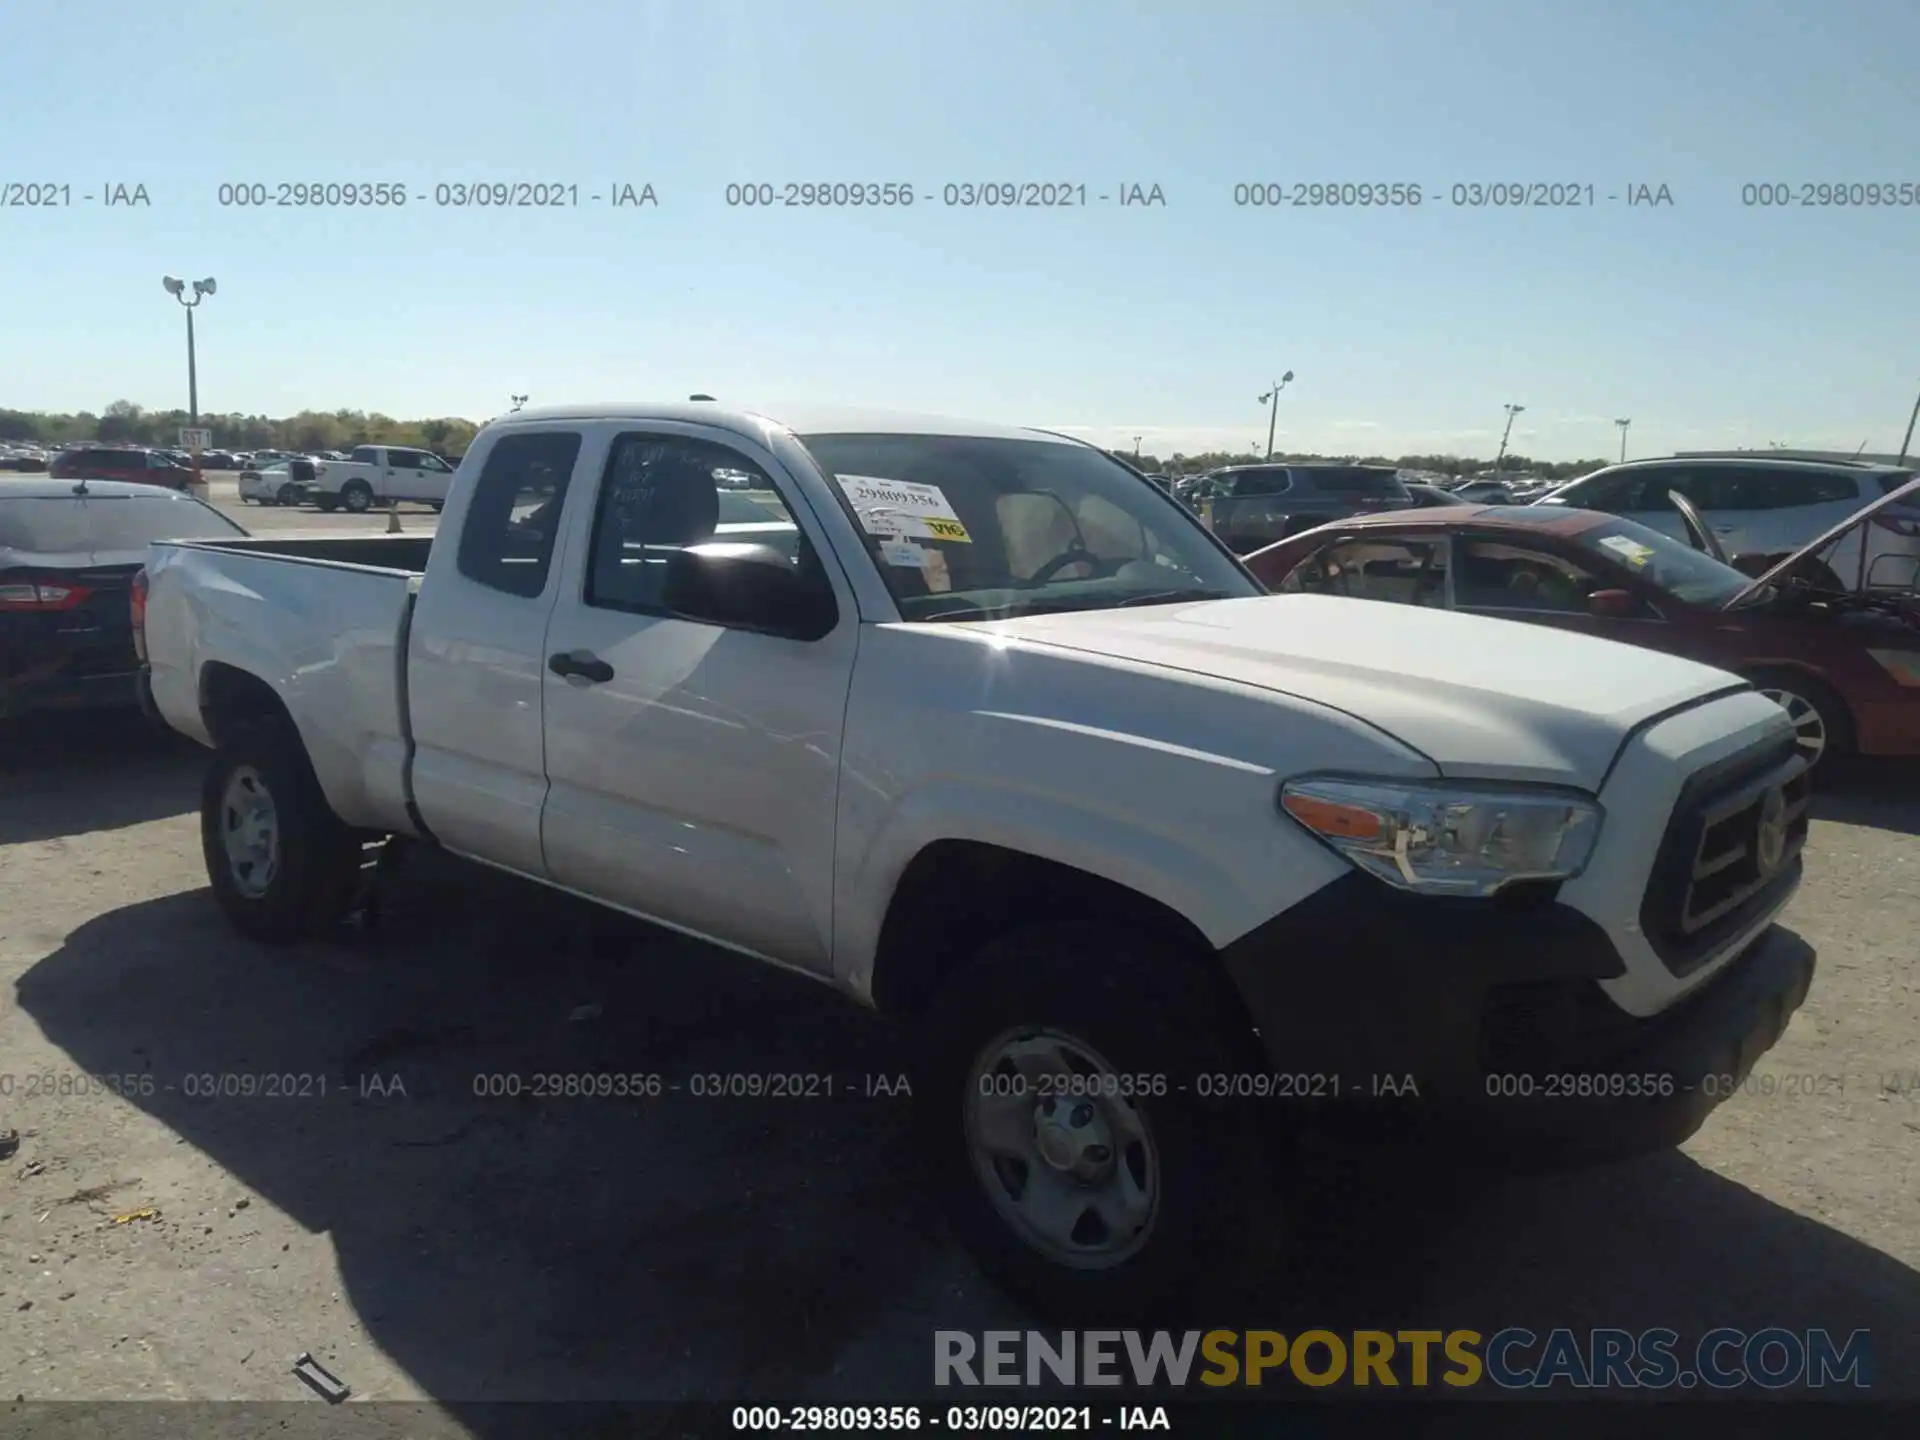 1 Photograph of a damaged car 5TFRX5GN5LX169704 TOYOTA TACOMA 2WD 2020